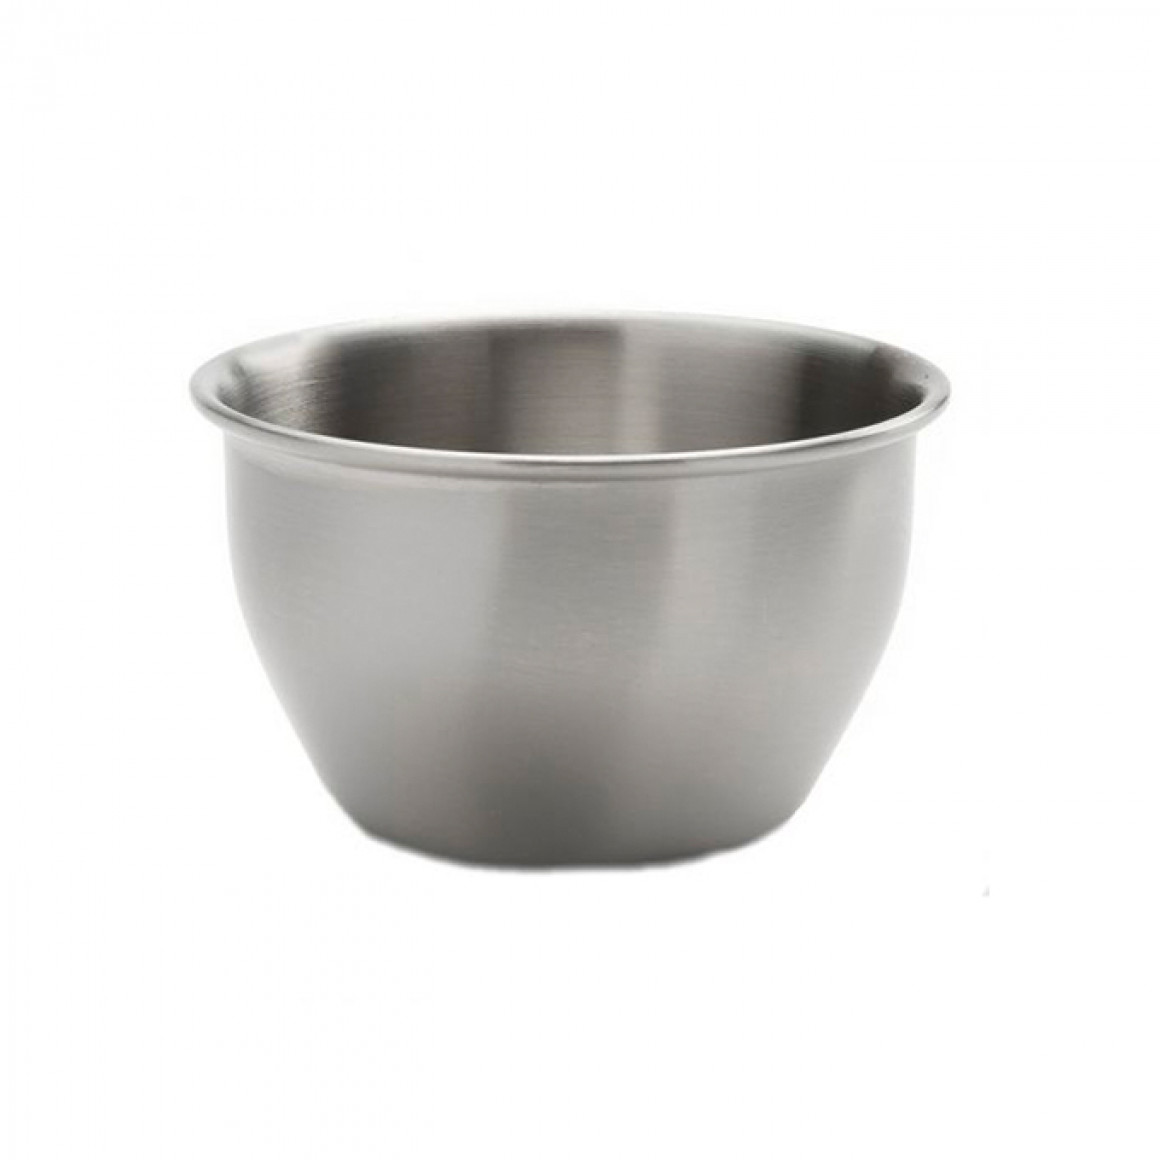 SAUCE CUP, STAINLESS STEEL, ROUND, 8 OZ.